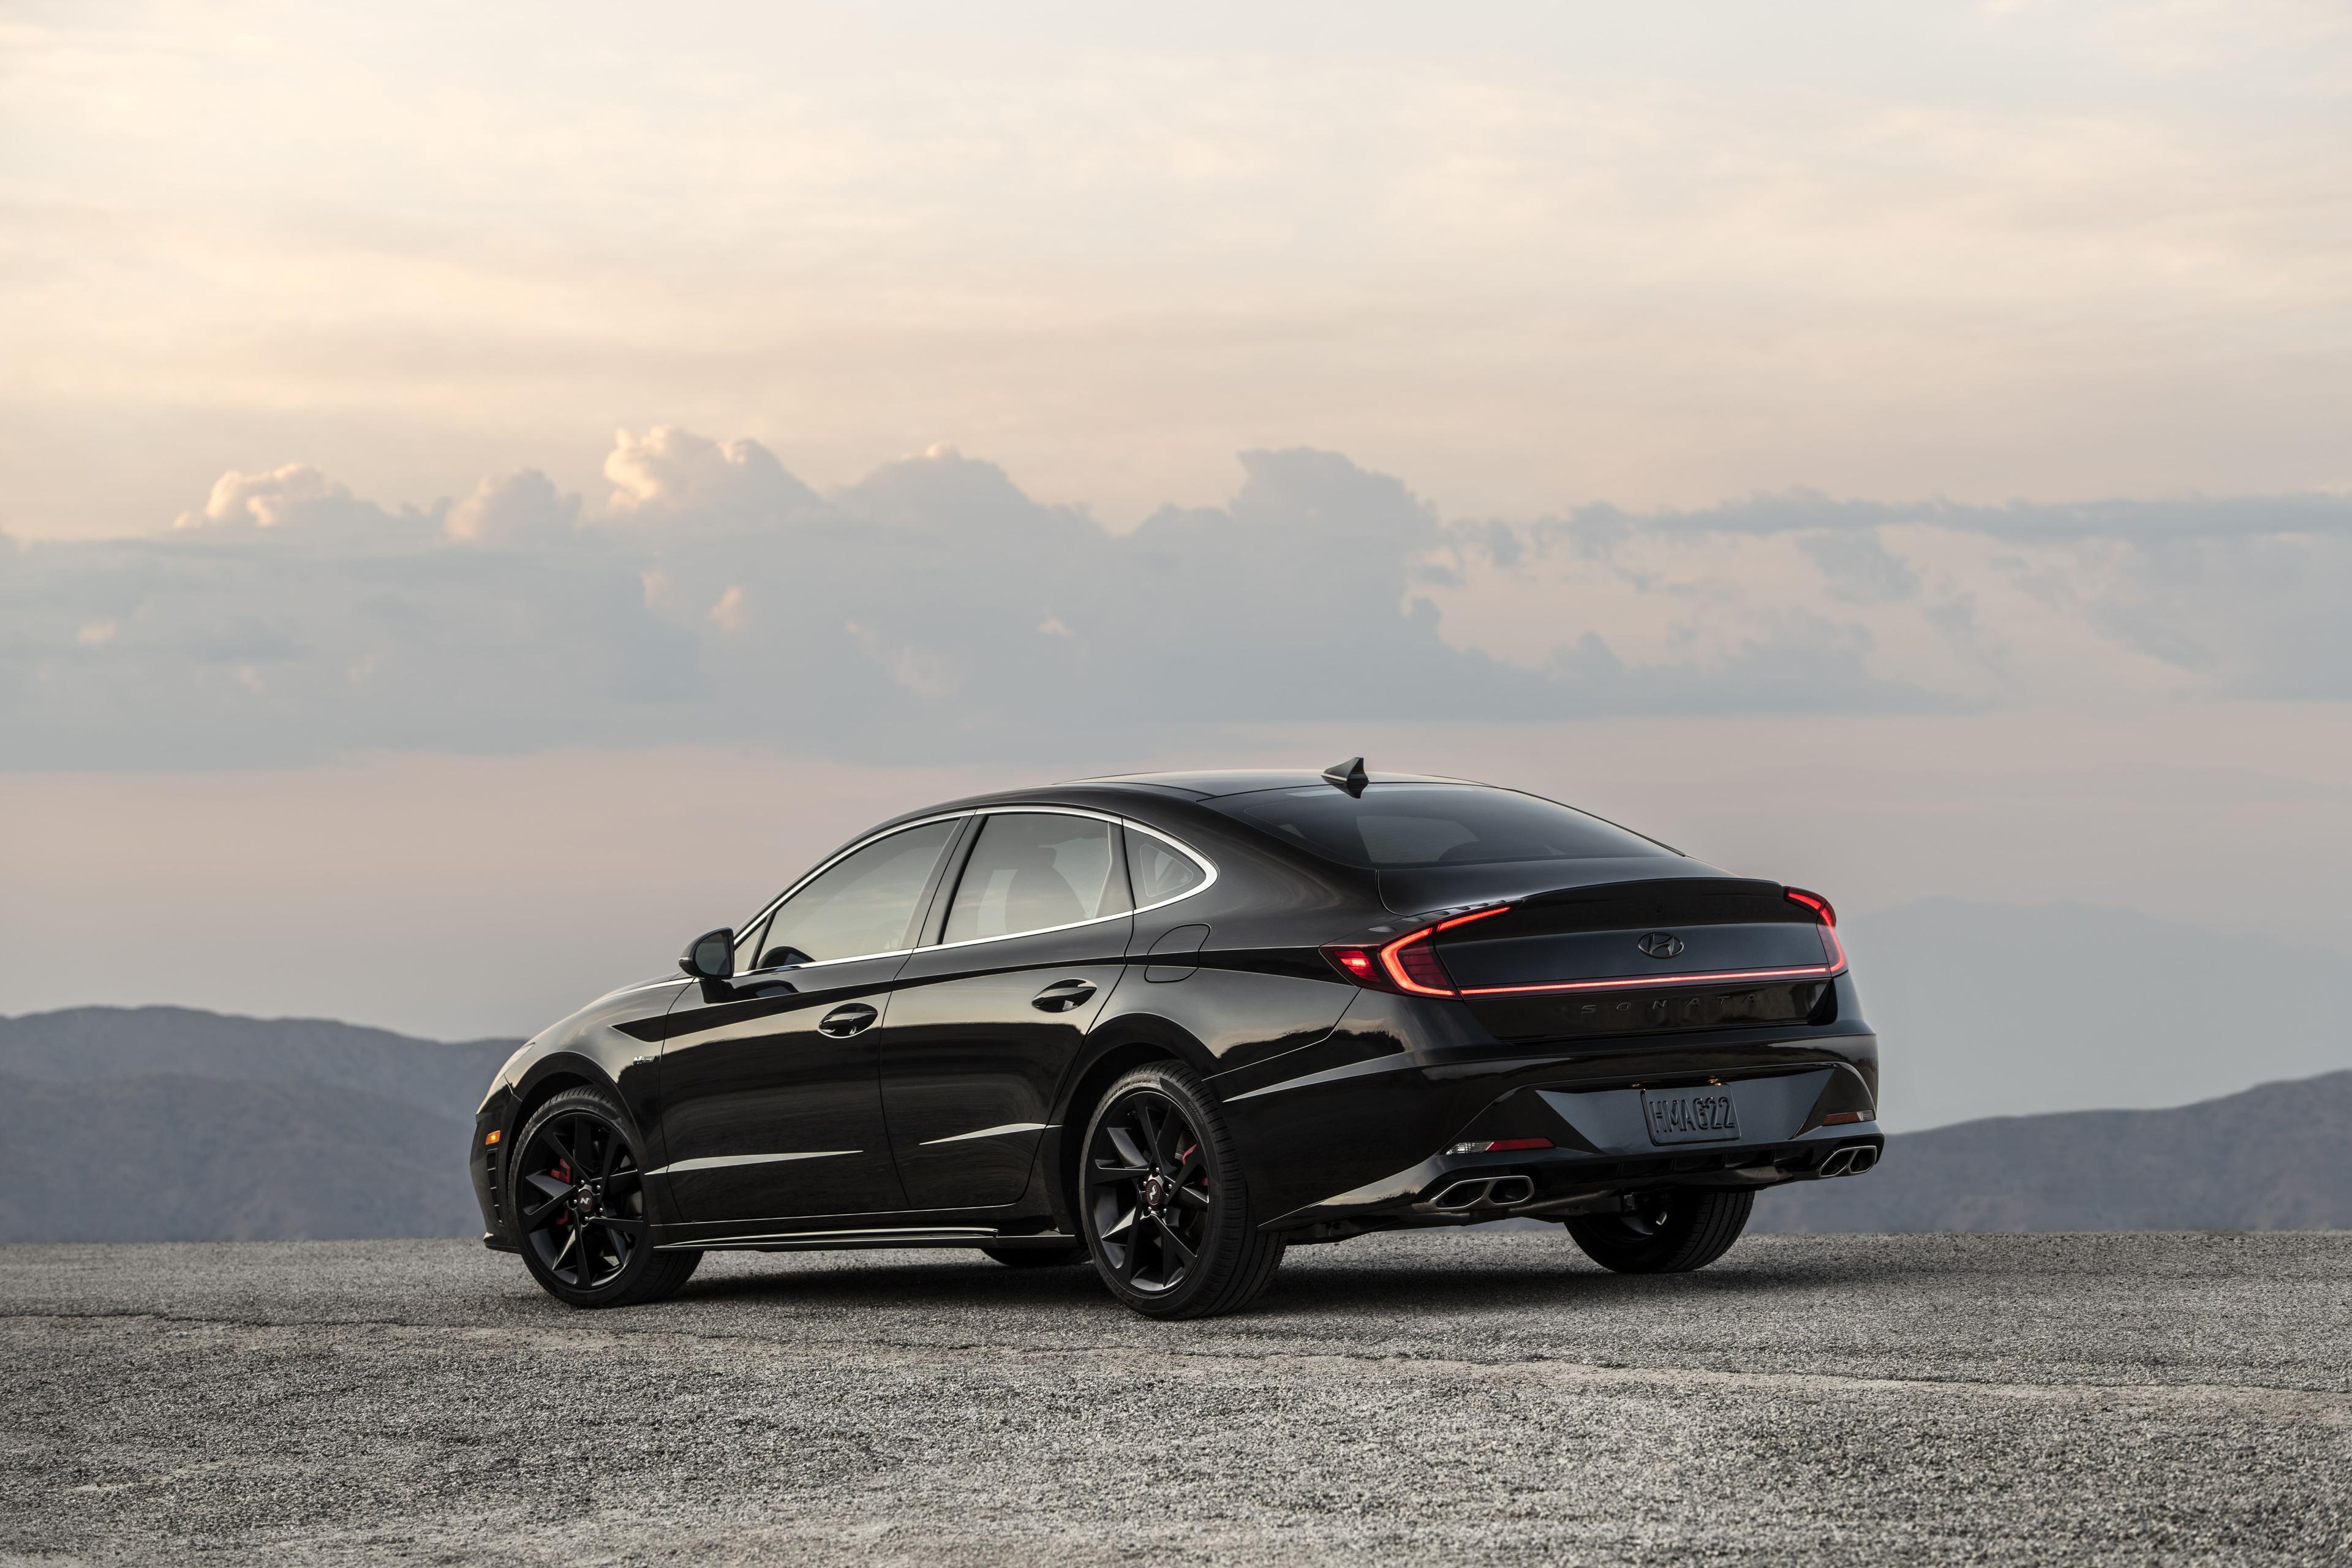 Looking for a sleek, blacked-out car package? We’ve got you covered.